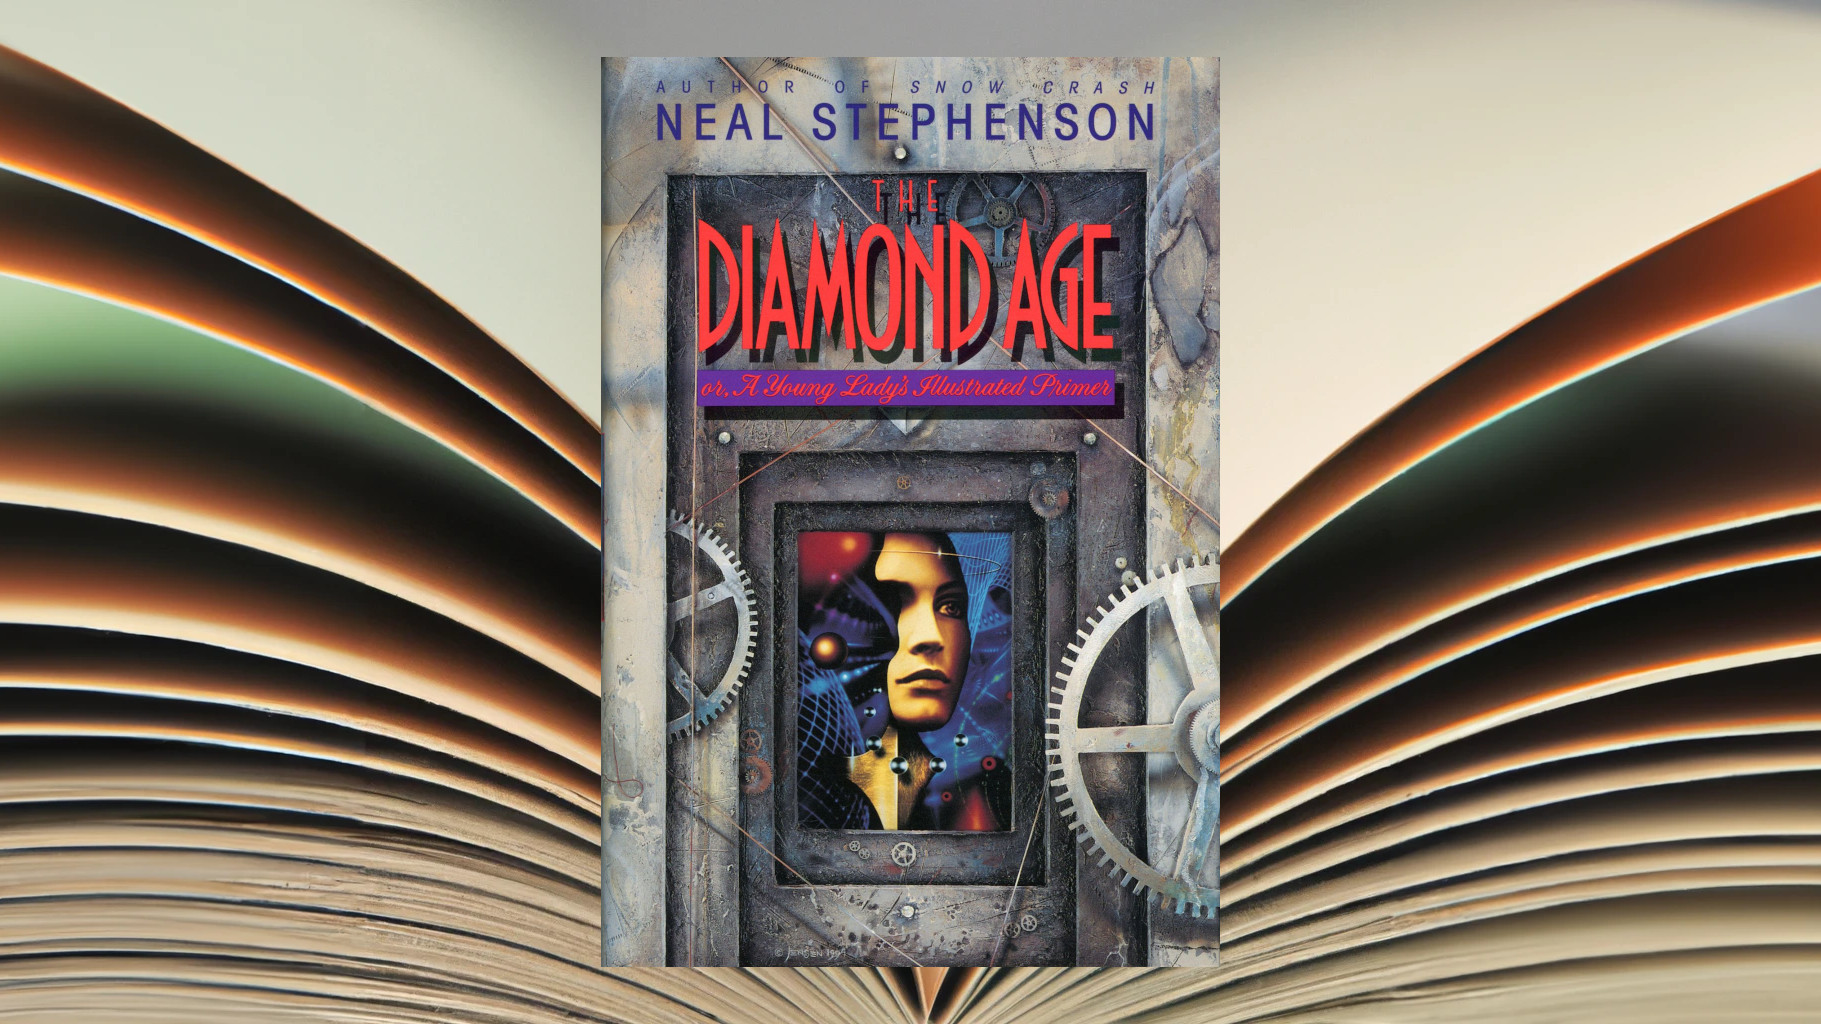 What are you reading? – The Diamond Age